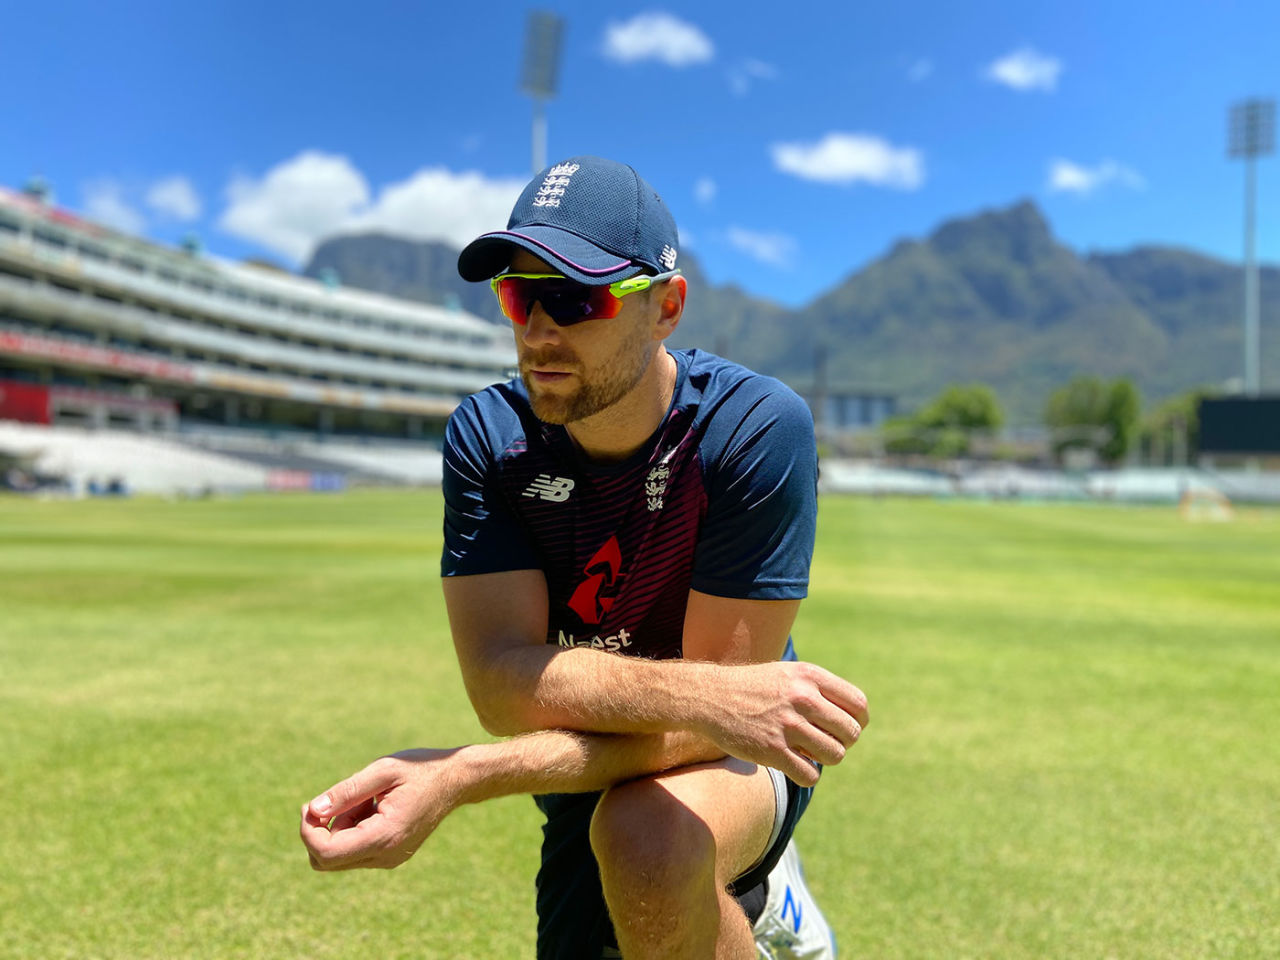 Dawid Malan speaks to the media during England training at Newlands, South Africa v England, November 19, 2020